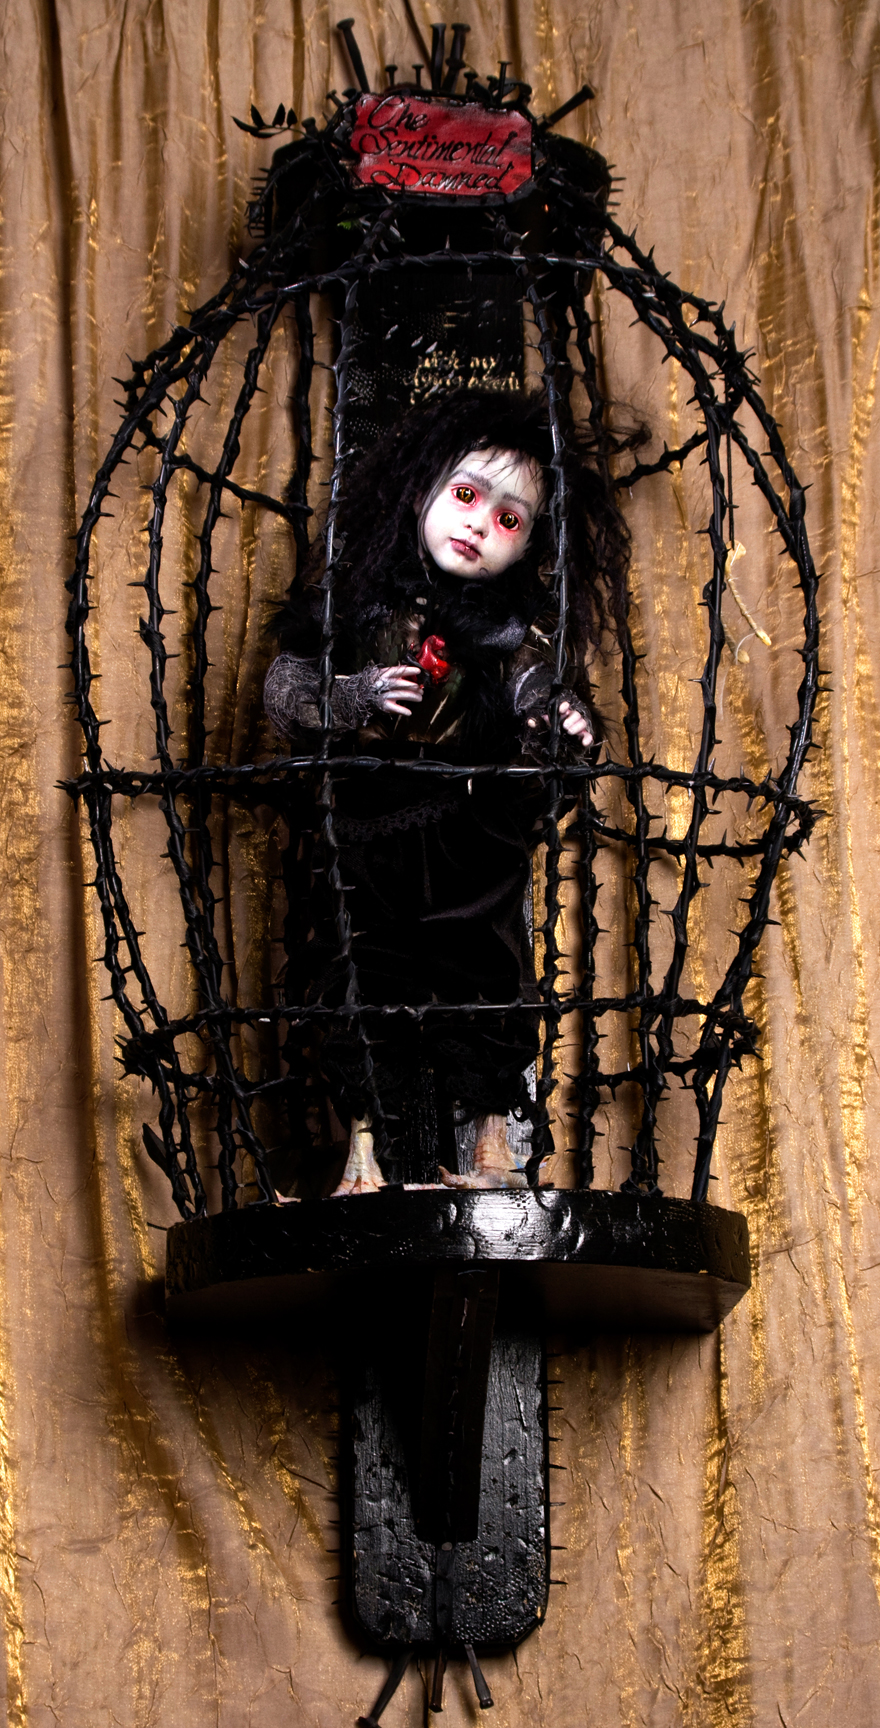 pale gothic red rimmed eyes black hair doll repaint black feathered velvet doll with taxidermied bird feet standing in a black thorn cage